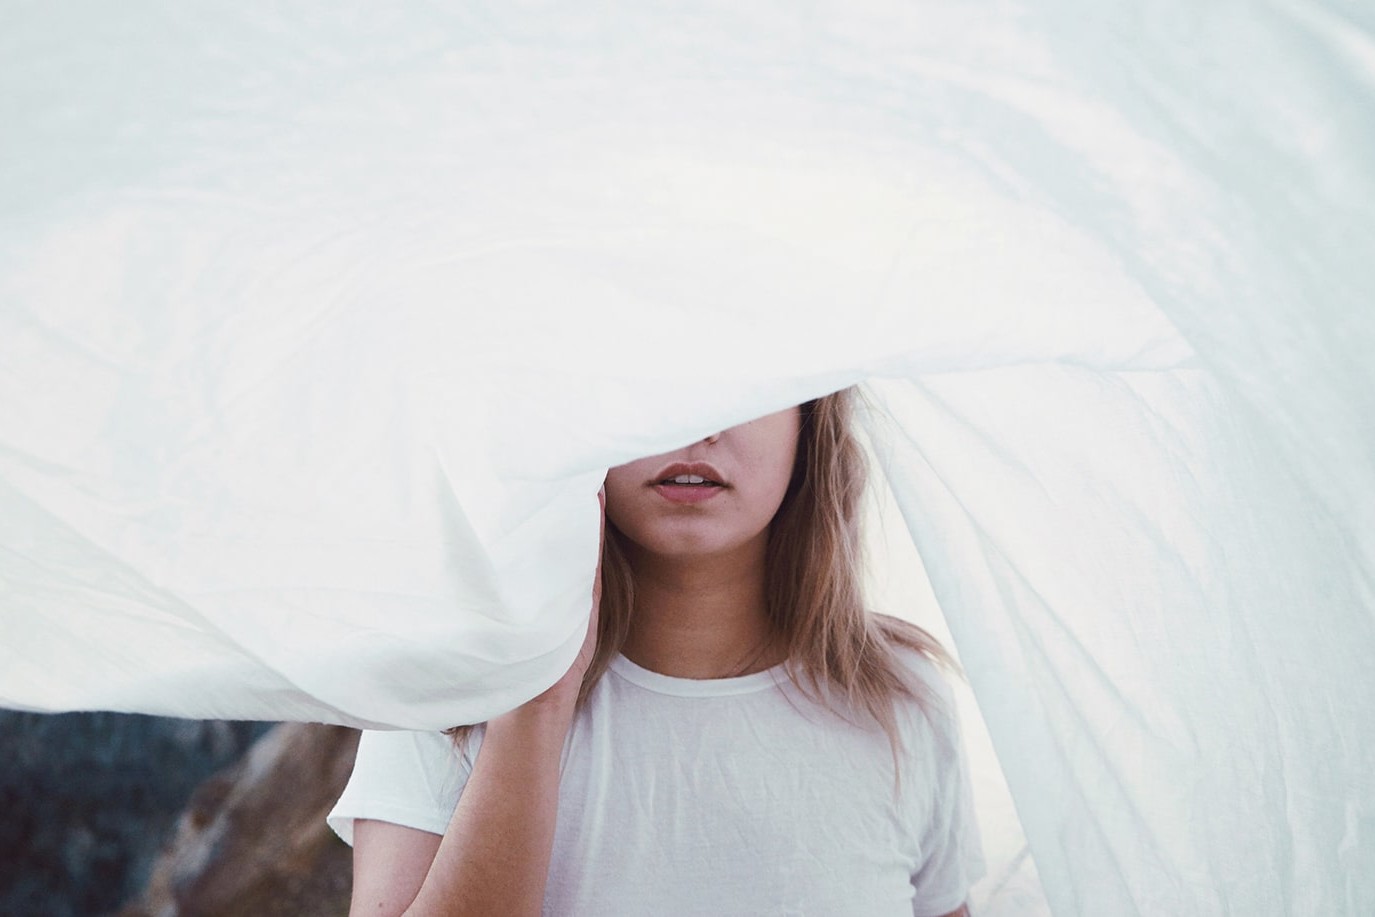 Woman standing behind white sheet covering face